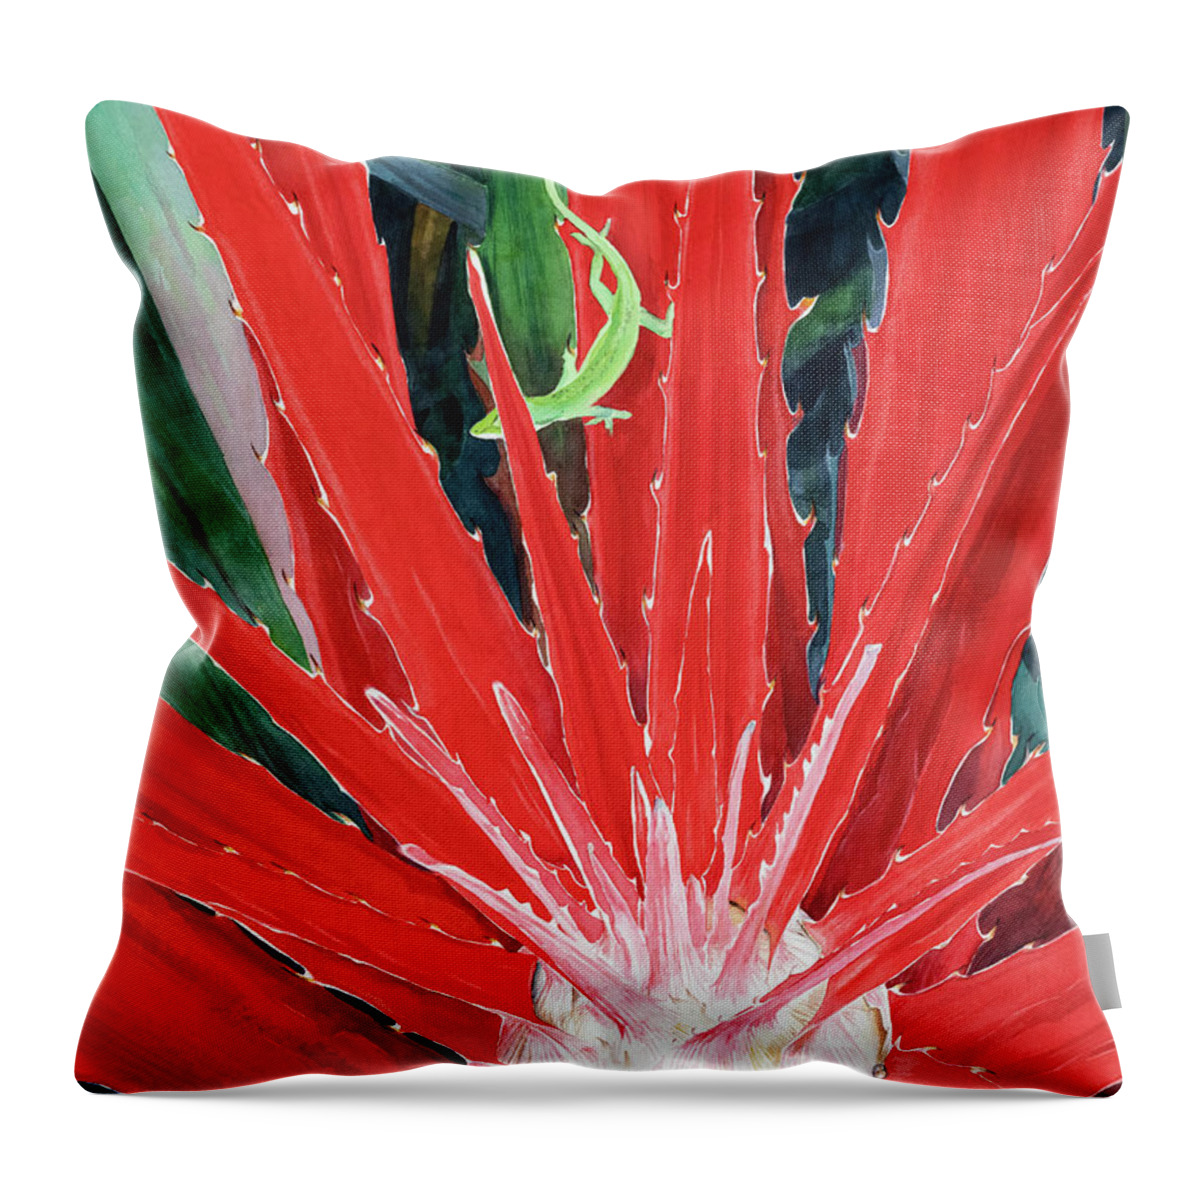 Botanical Throw Pillow featuring the painting Complimentary Hearts of Flame by Lisa Tennant